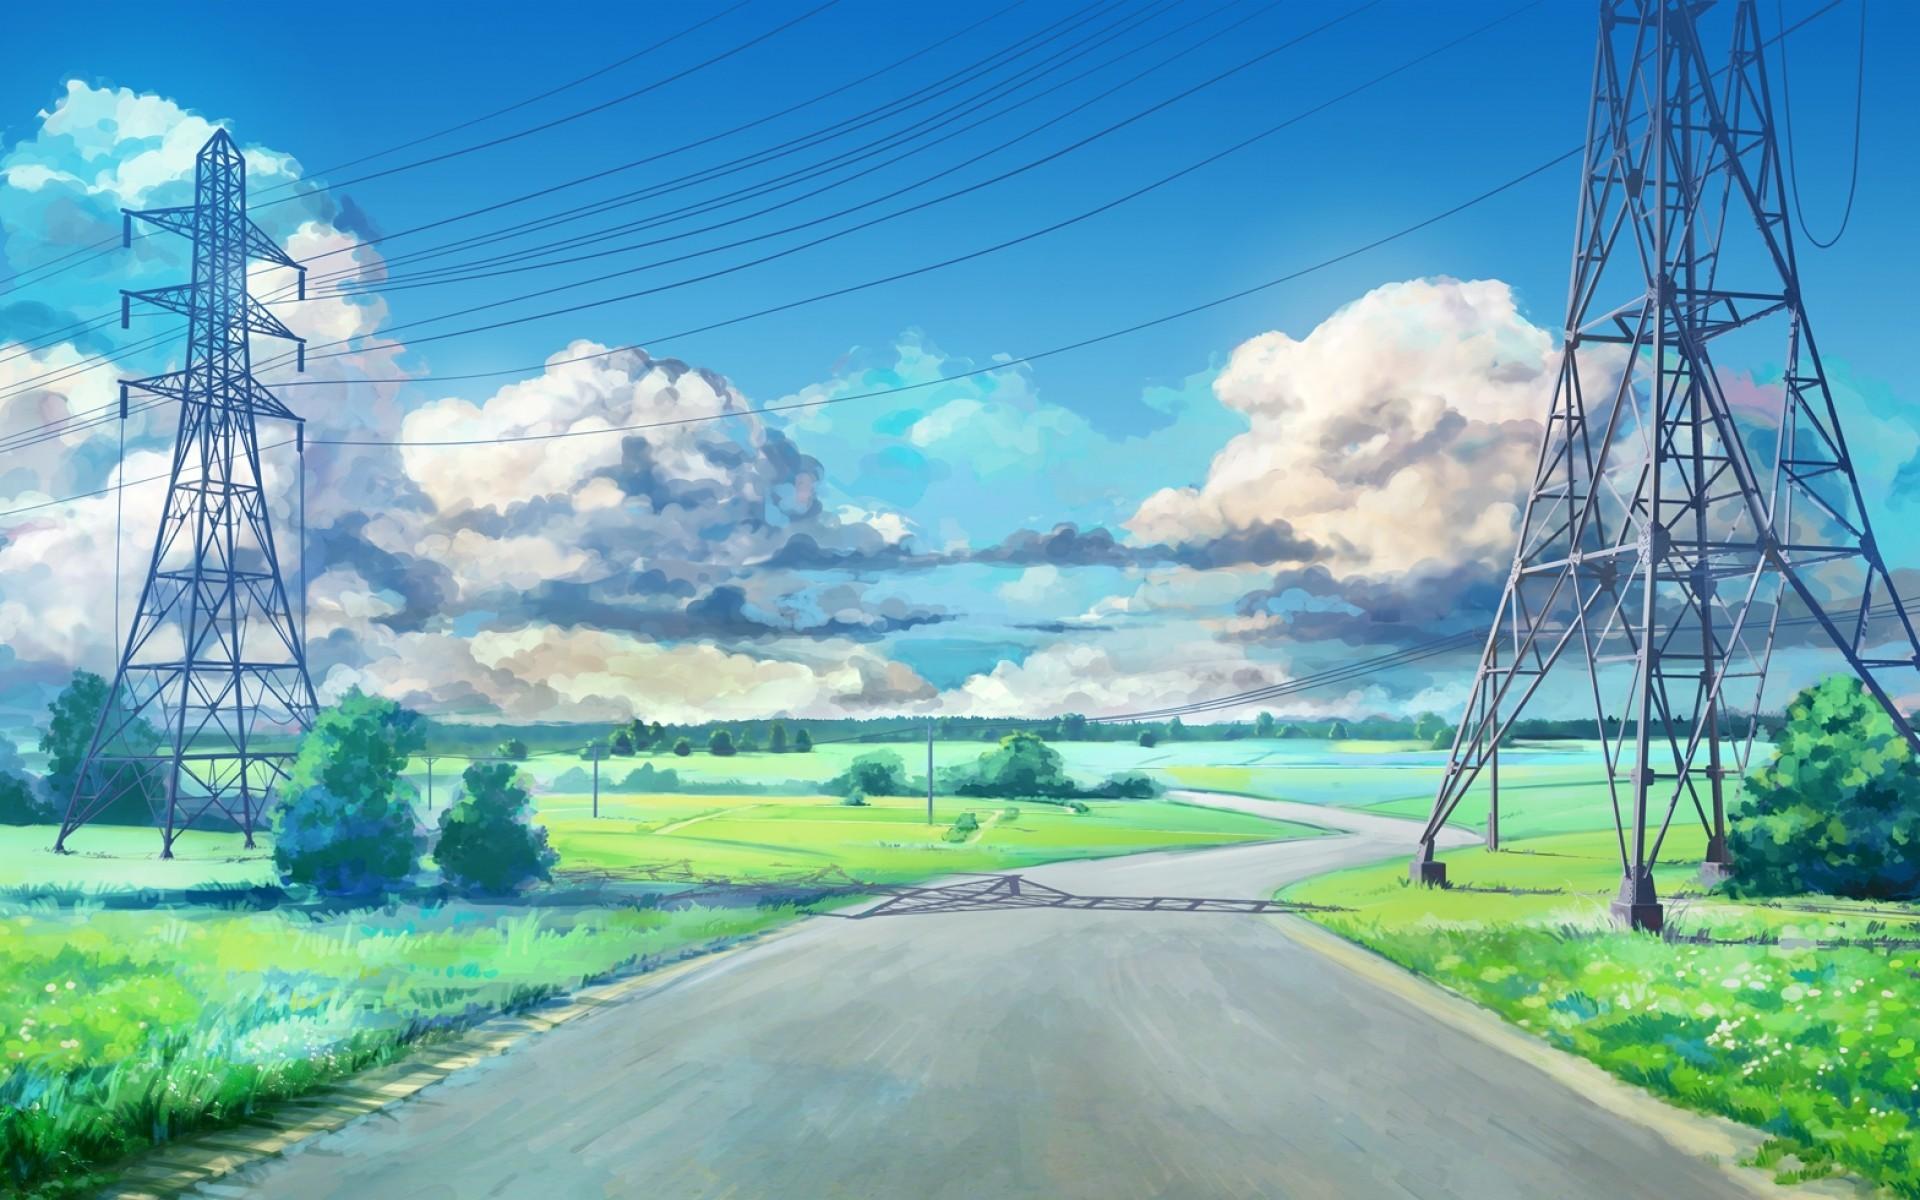 Download 1920x1200 Anime Landscape, Clouds, Grass, Field, Scenic, Summer Wallpaper for MacBook Pro 17 inch